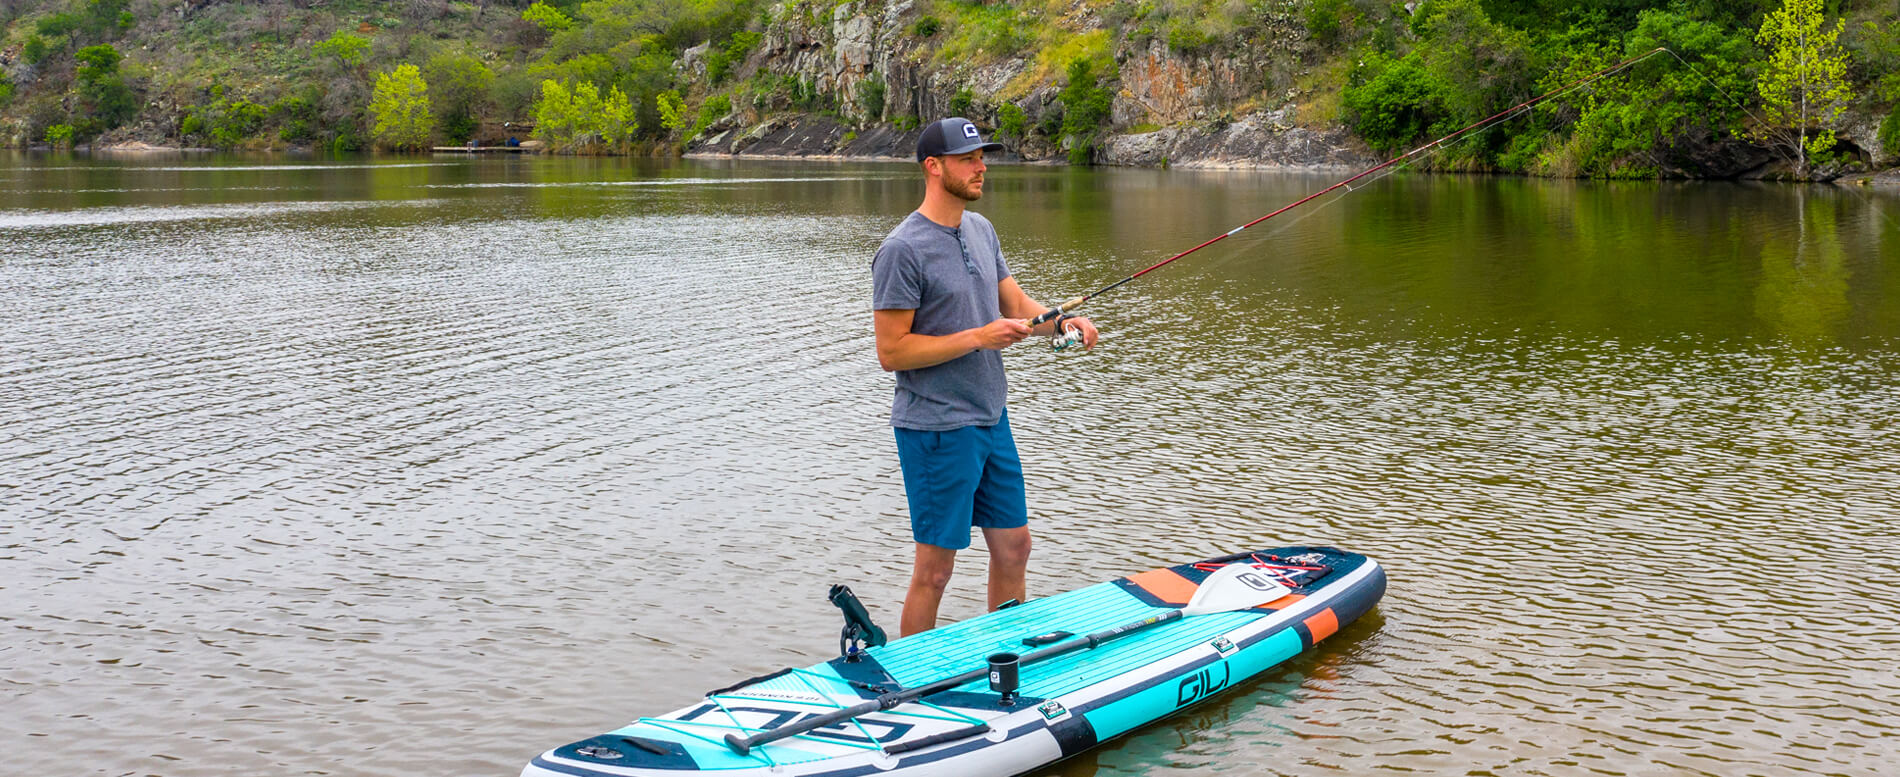 How to be better at SUP Fishing